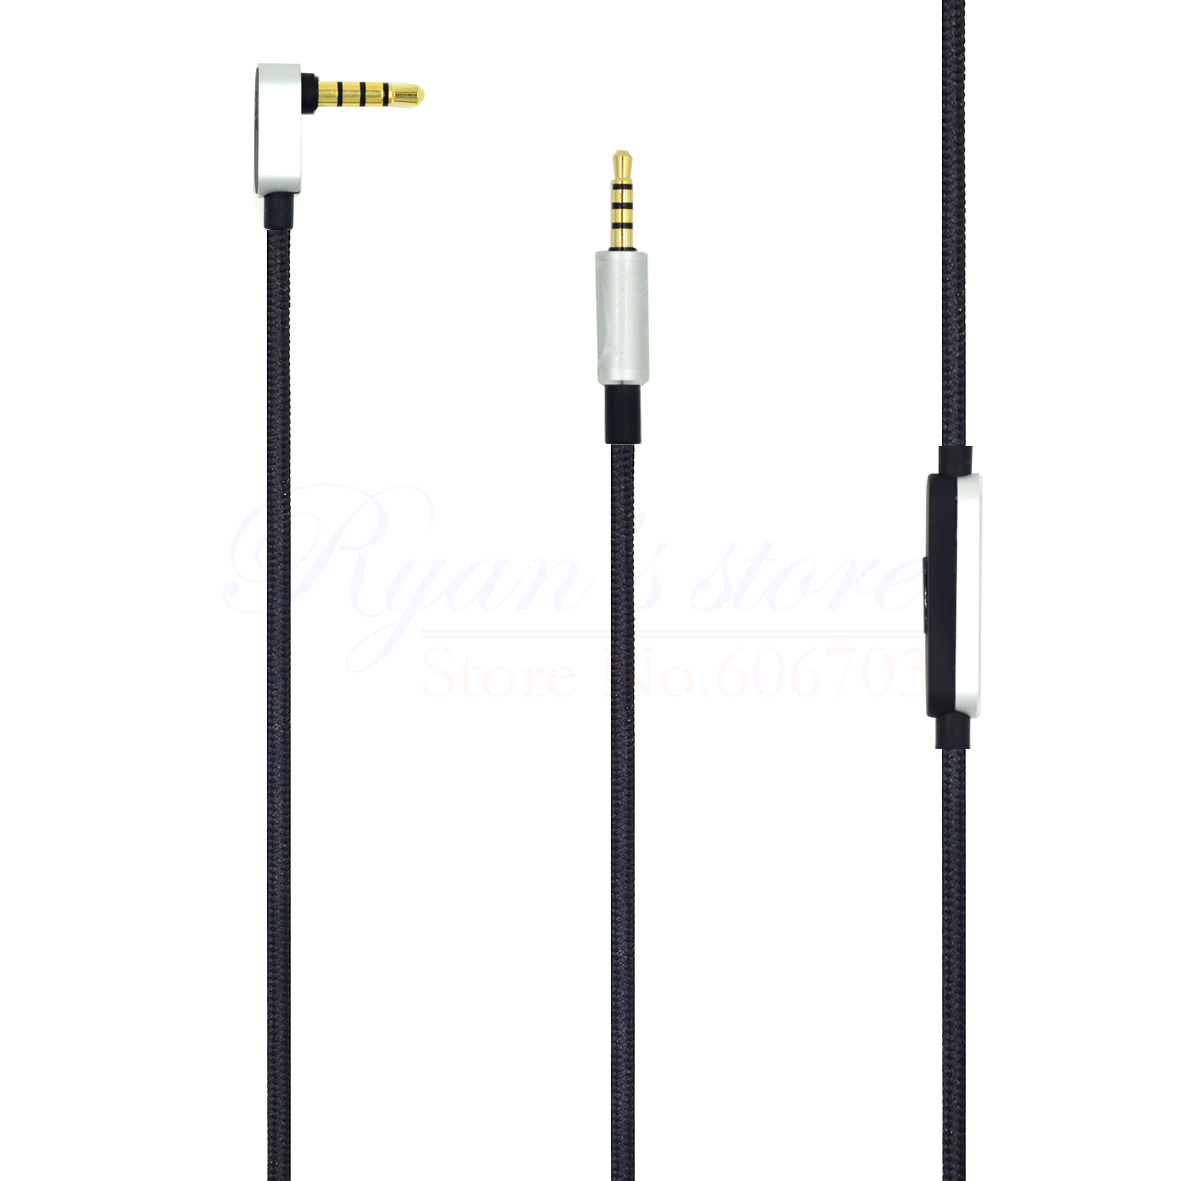 ü   ̺ AKG N60 NC n60nc  ڵ ȸ  ũ   /Replacement Audio cable Cord wireremote and mic for AKG N60 NC n60nc Reference headphone